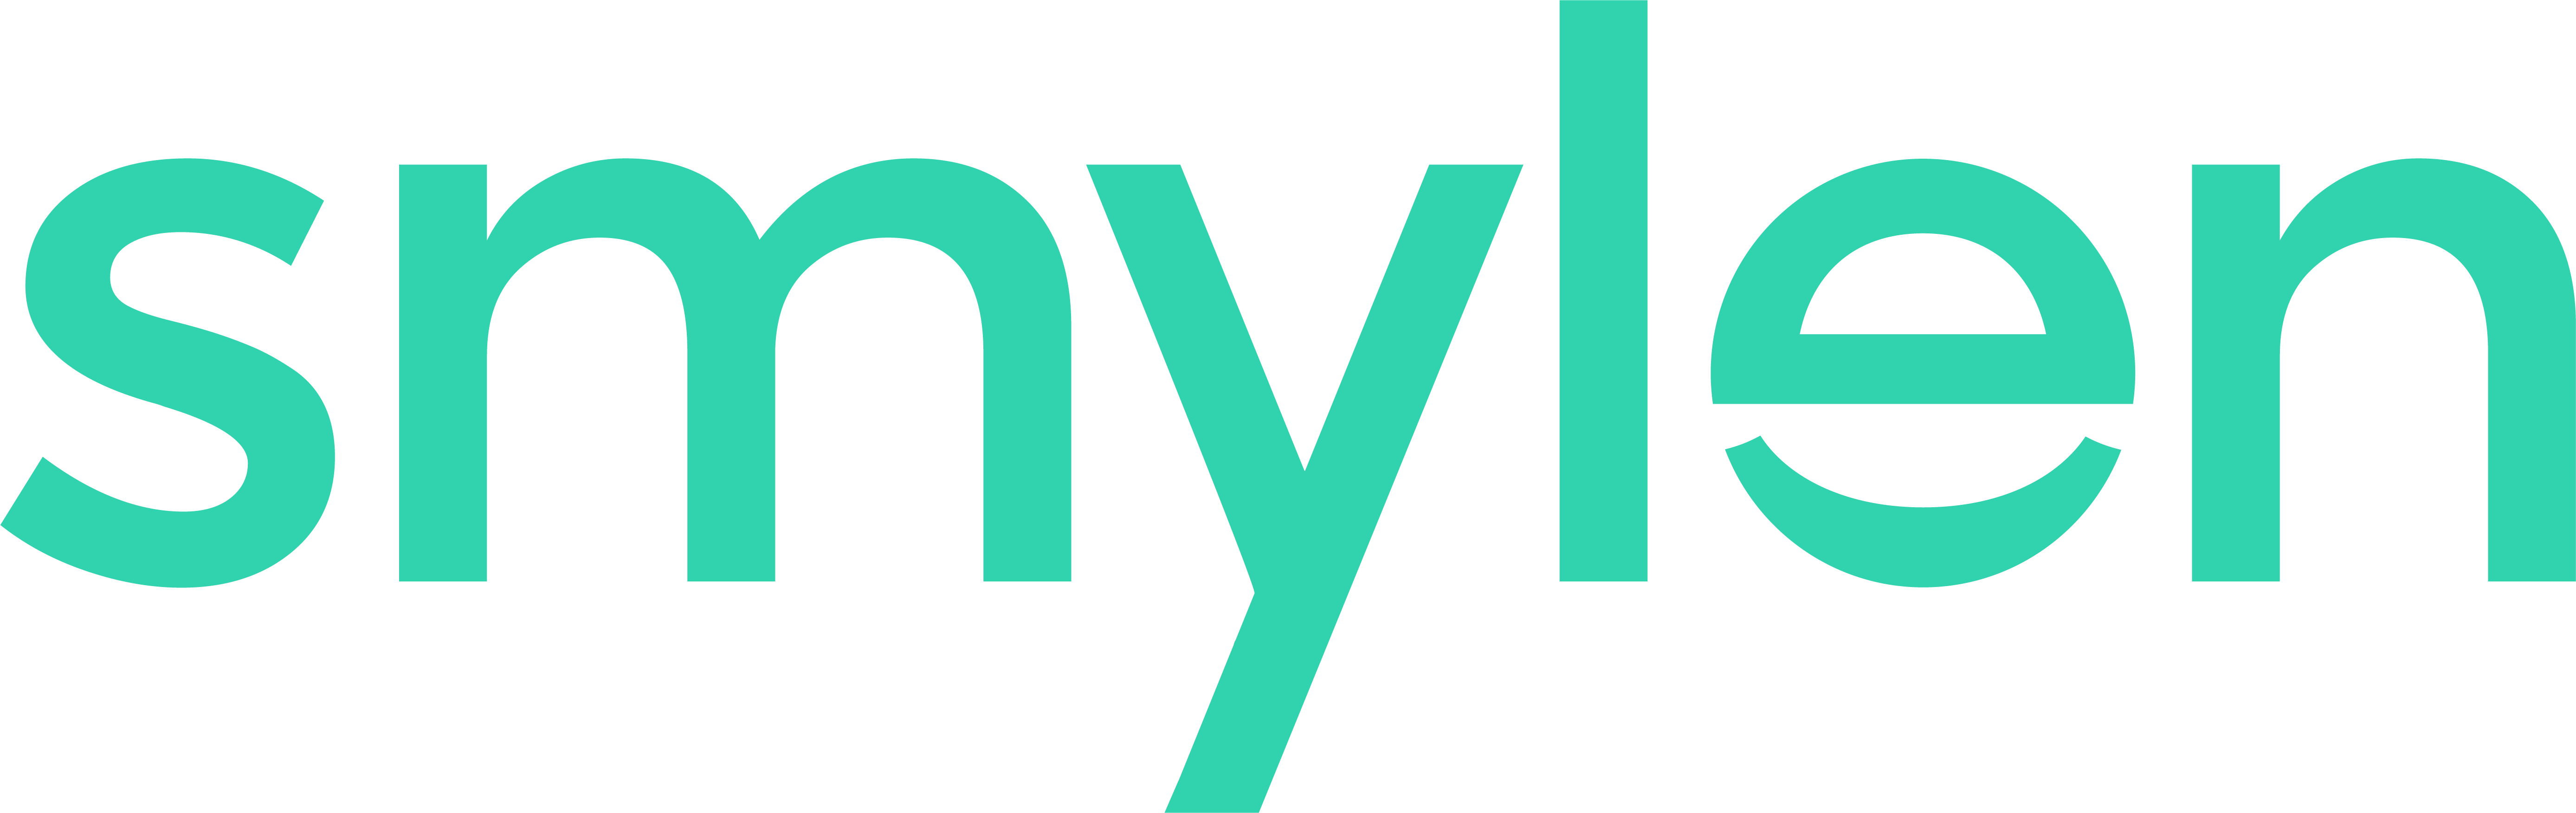 Smylen is a new kind of dental plan that combines a network of top doctors, their absolute best prices, 24/7 concierge care navigation, Airbnb-style booking, flexible payments, & personalized insurance…